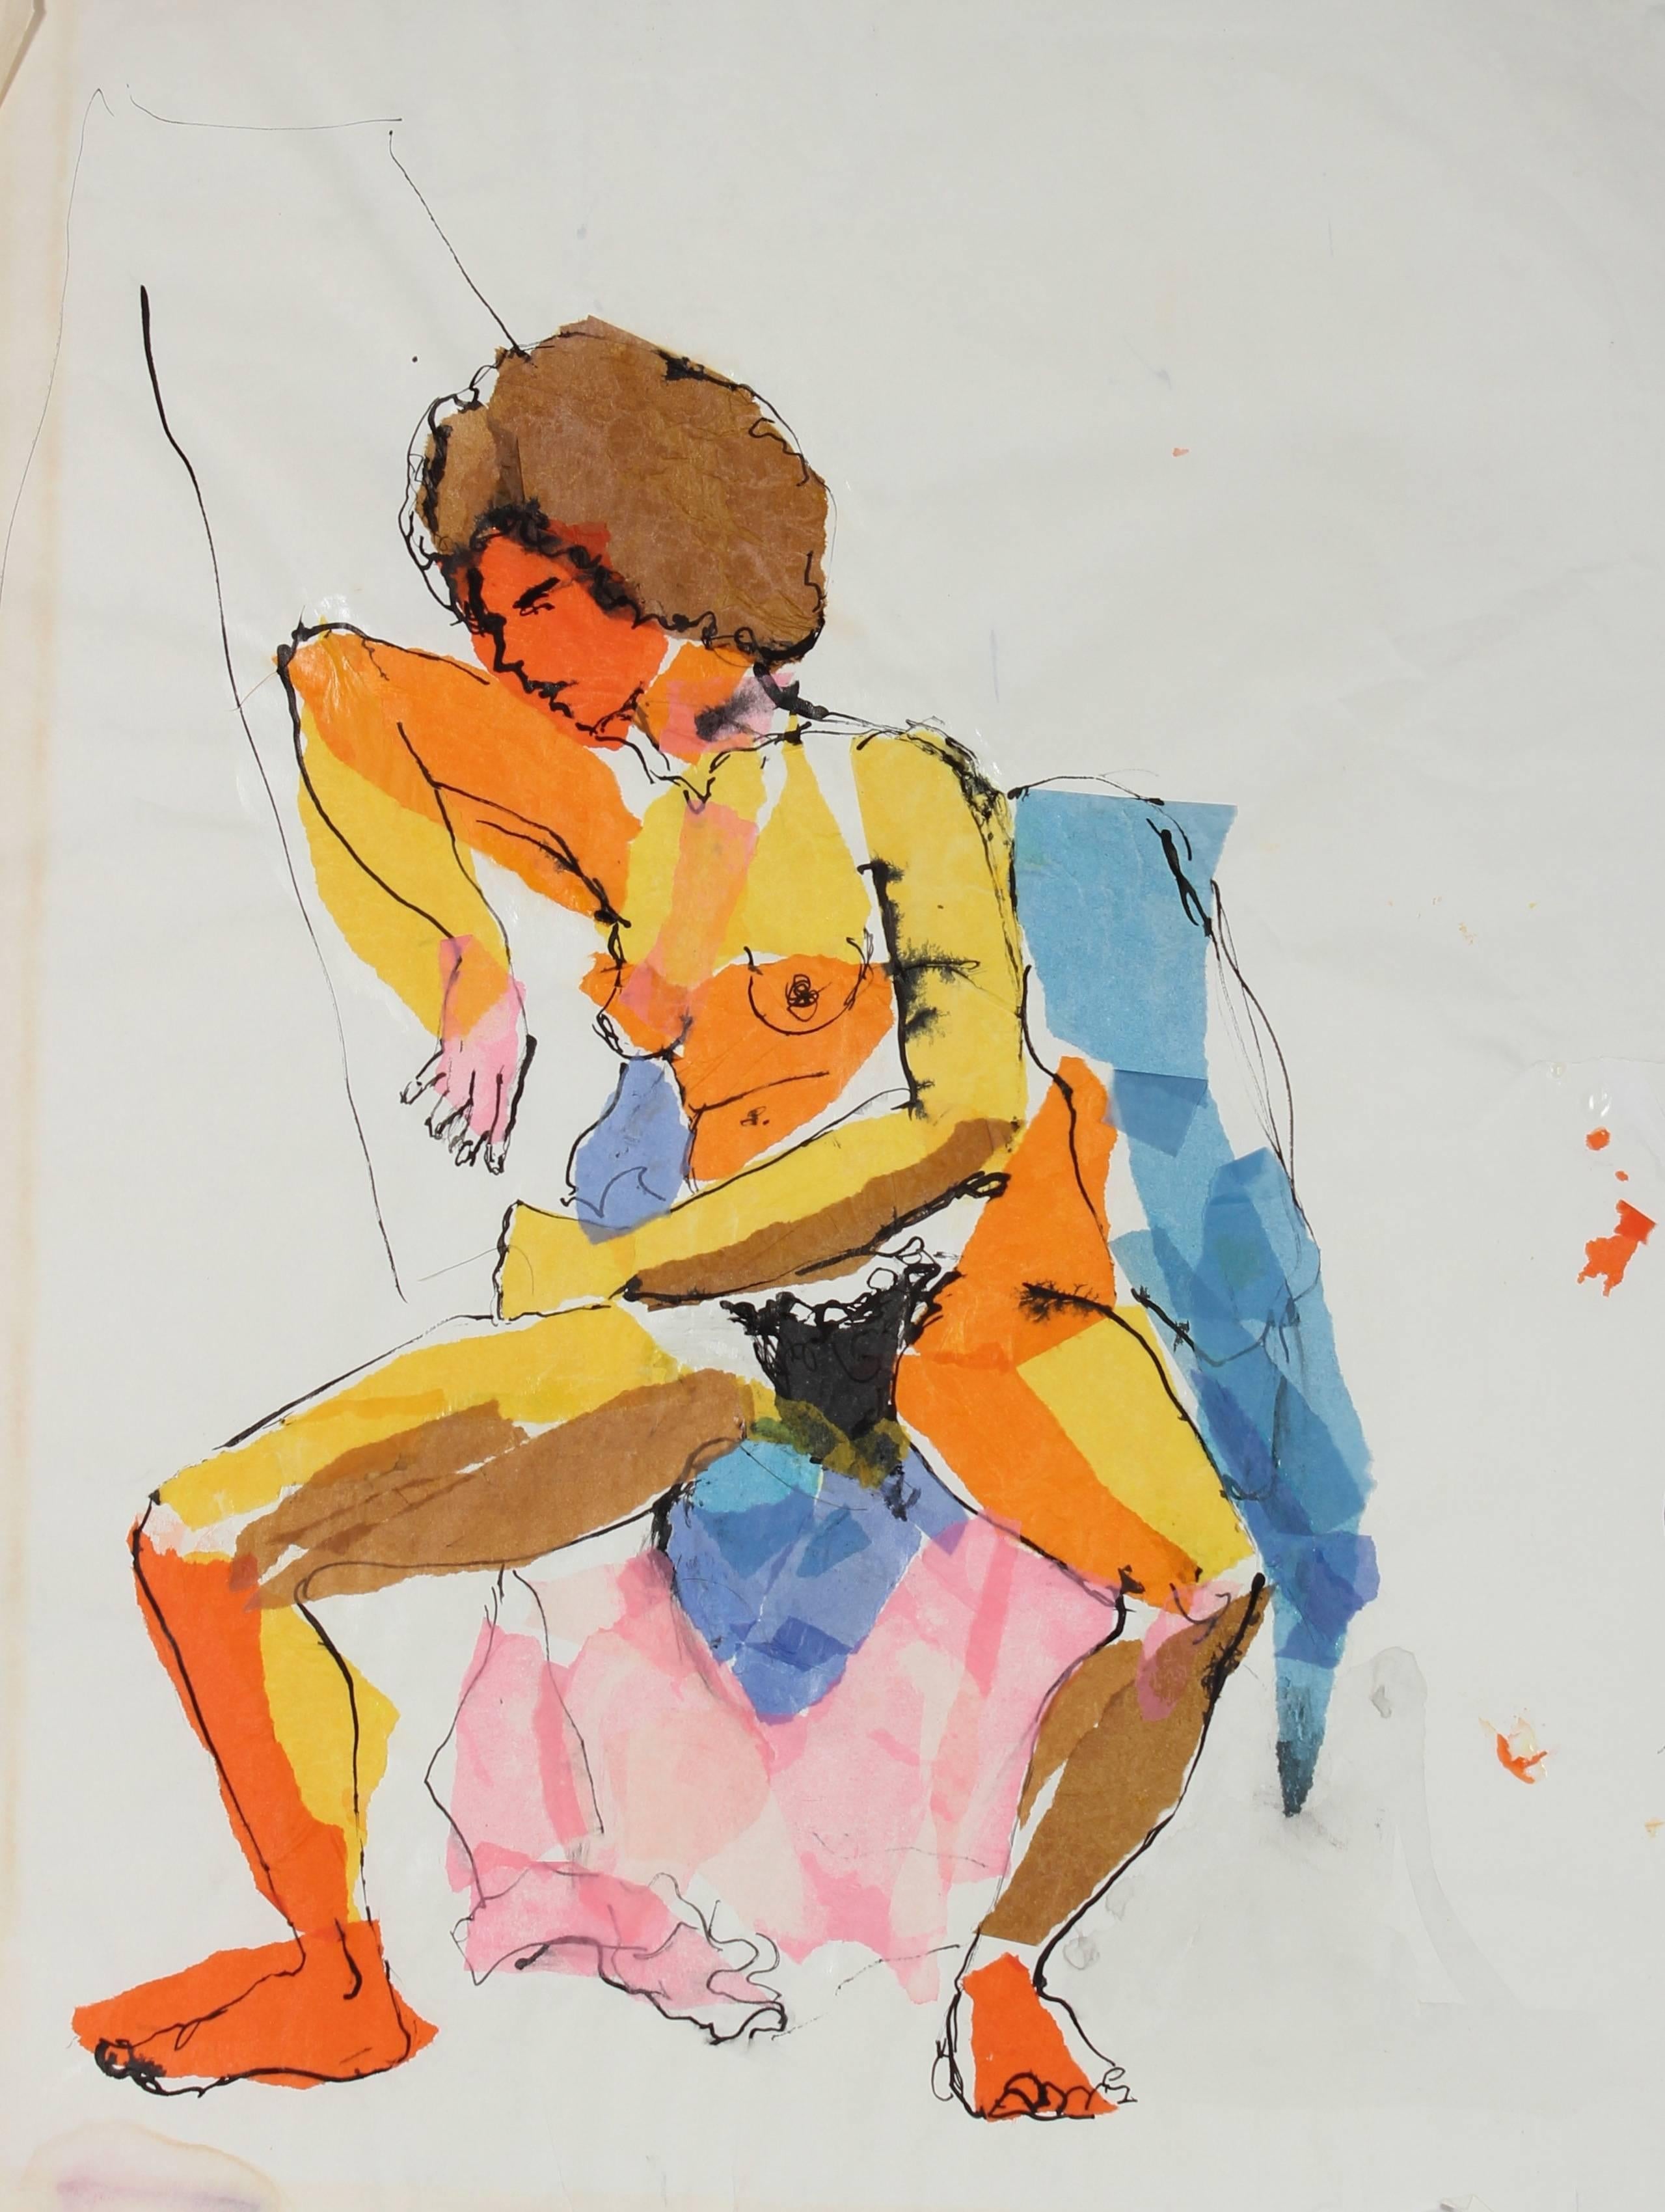 Colorful Seated Nude, Paper and Ink Collage, Circa 1970s - Mixed Media Art by Estelle Levin Siegelaub